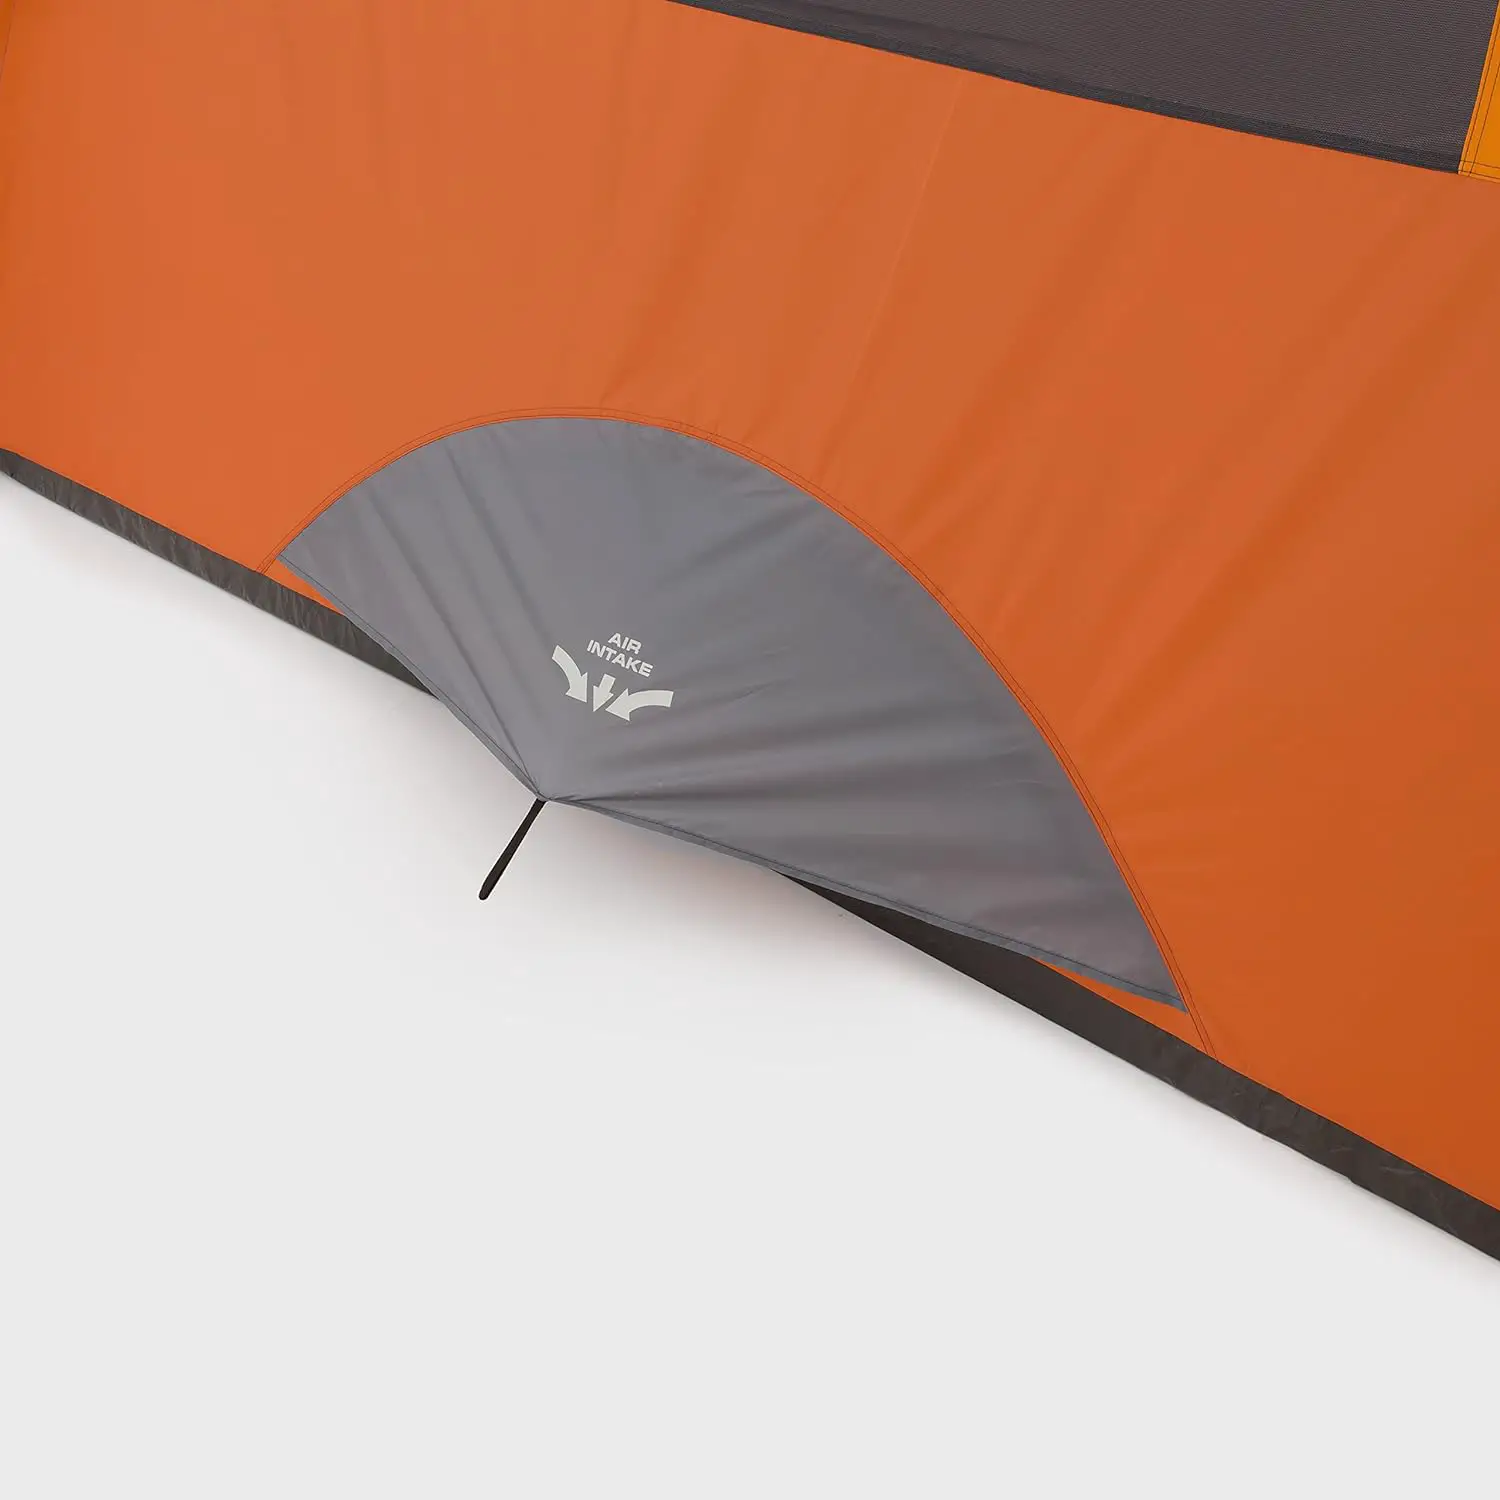 CORE Camping Tent Review